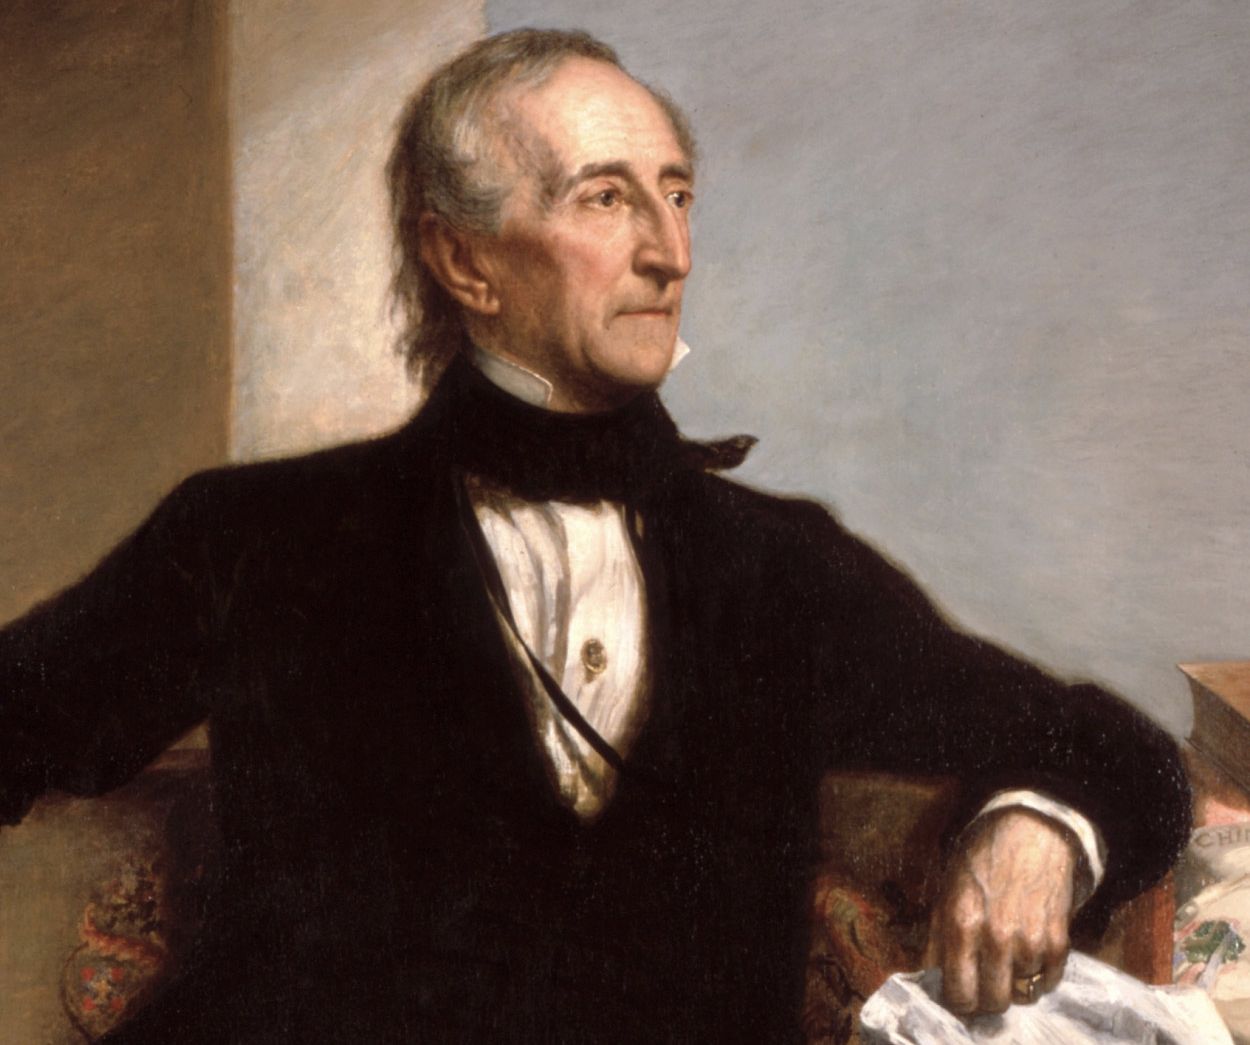 Members of Congress debated a resolution to impeach John Tyler for his vetoes and for withholding information from them. The President should be “dependent upon and responsible to” Congress, they argued. 